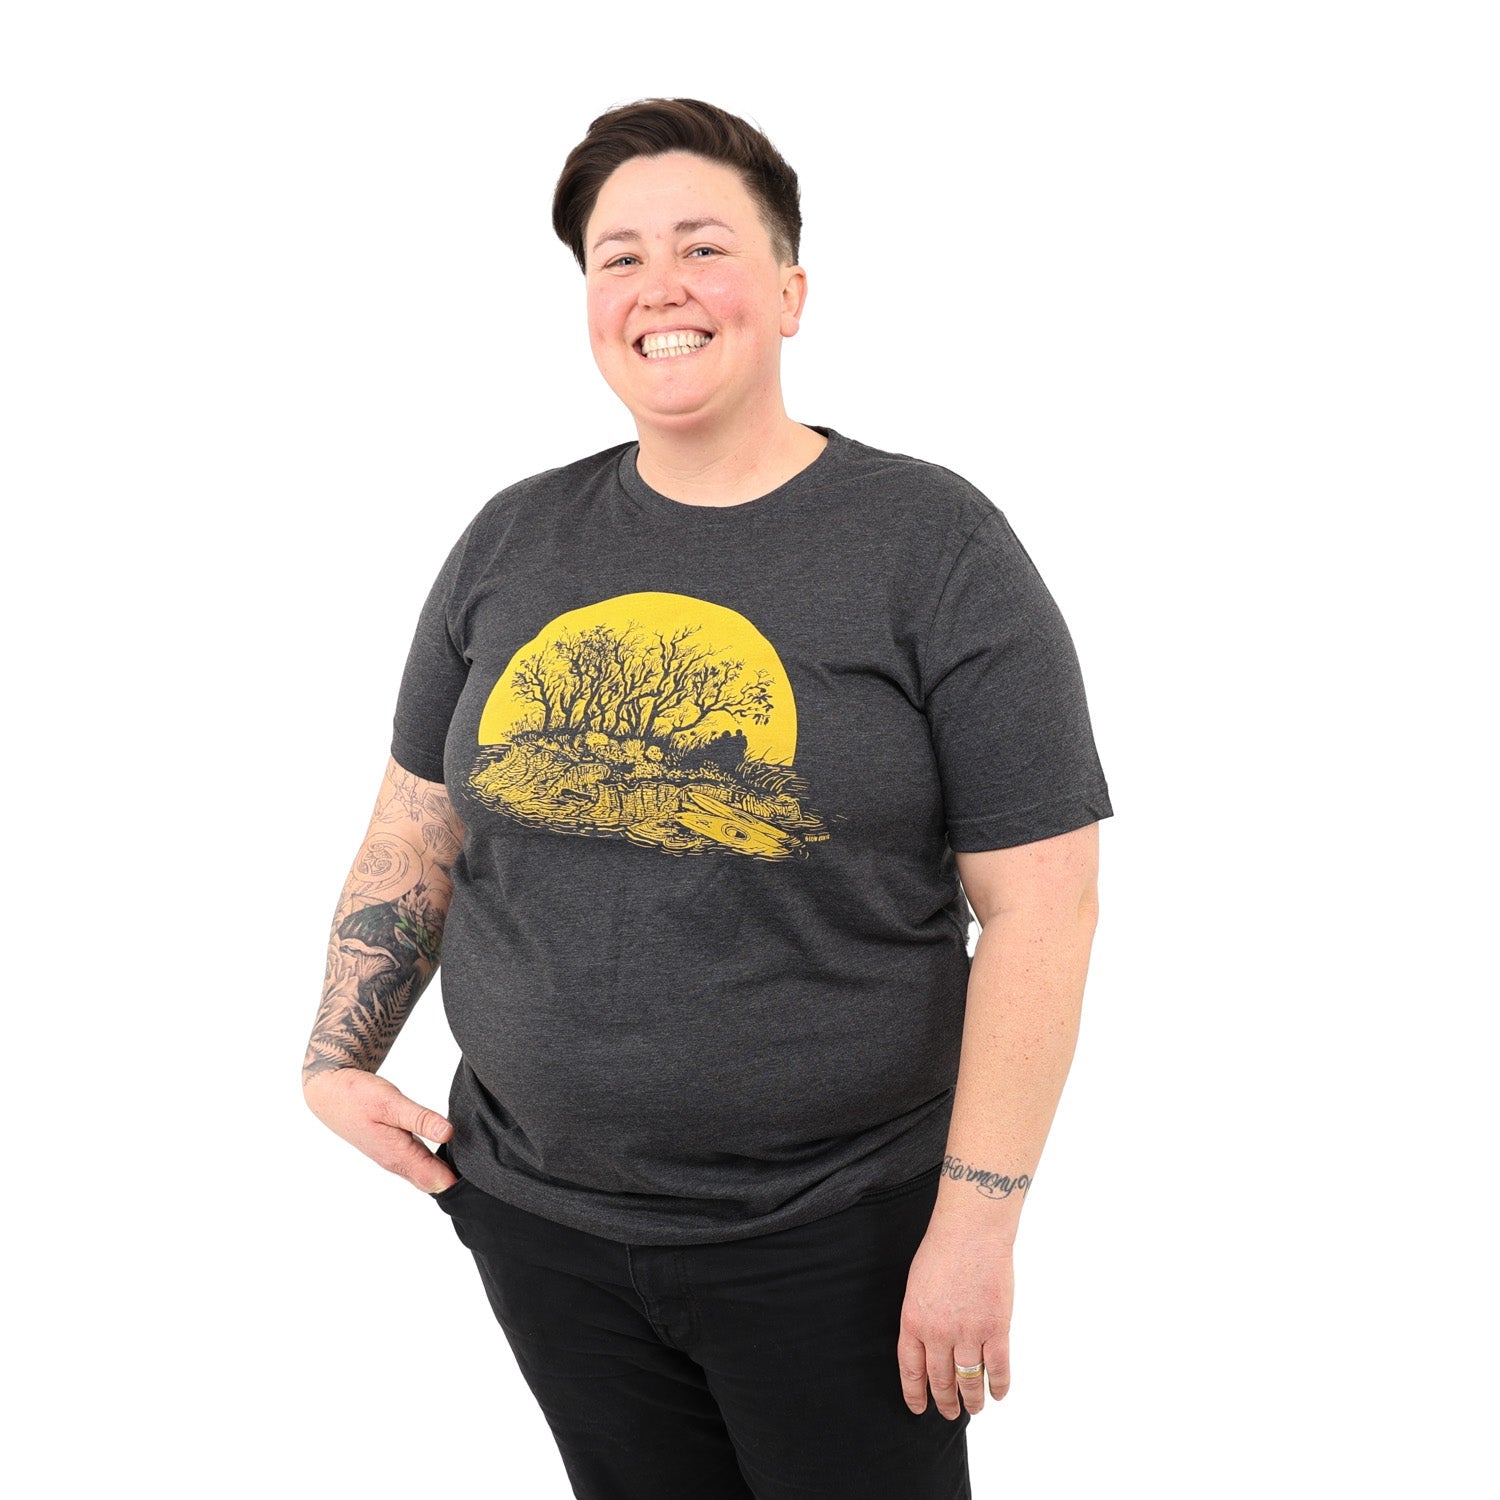 nice smiley woman with one hand in her pocket while wearing black jeans and a dark gray t-shirt with yellow kayaker print.